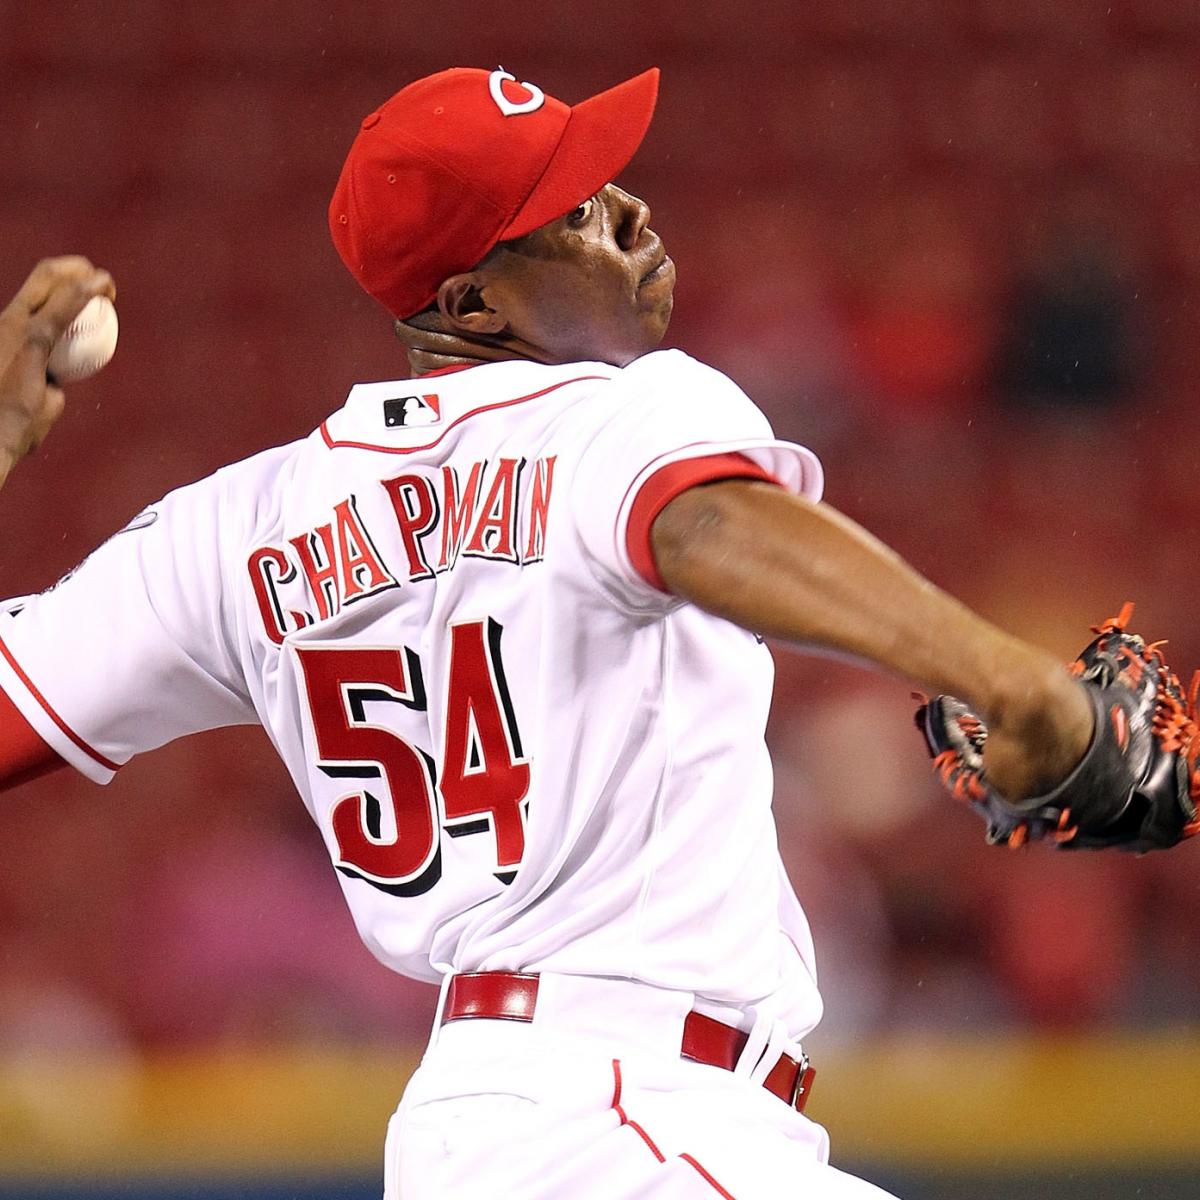 Photo of Aroldis Chapman Emerges and His Muscles Look Impossibly Huge